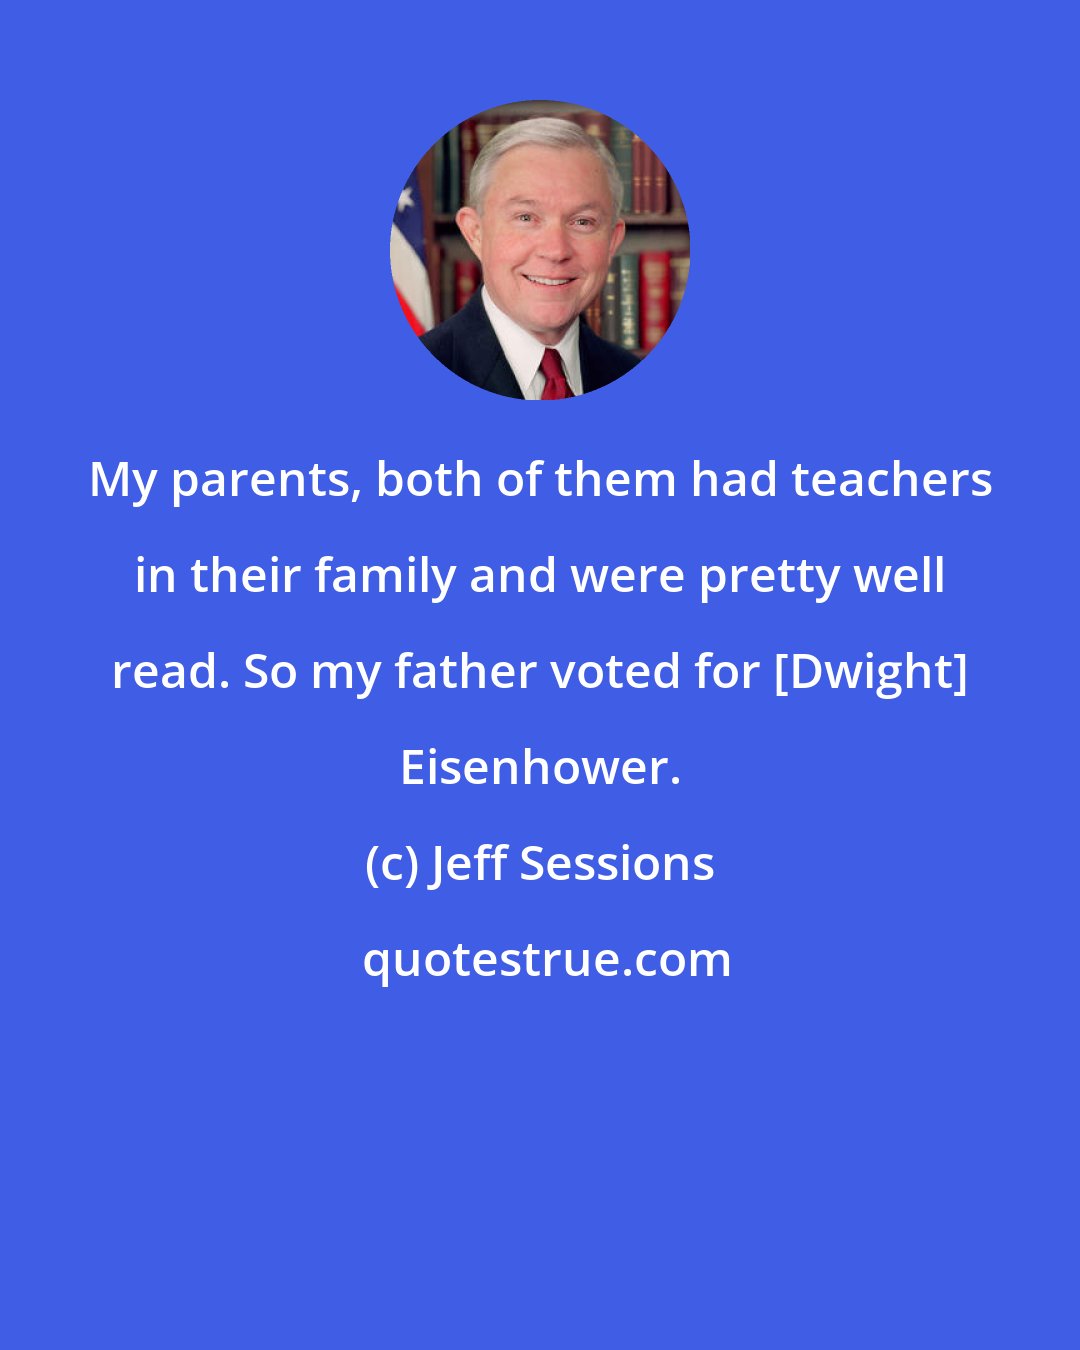 Jeff Sessions: My parents, both of them had teachers in their family and were pretty well read. So my father voted for [Dwight] Eisenhower.